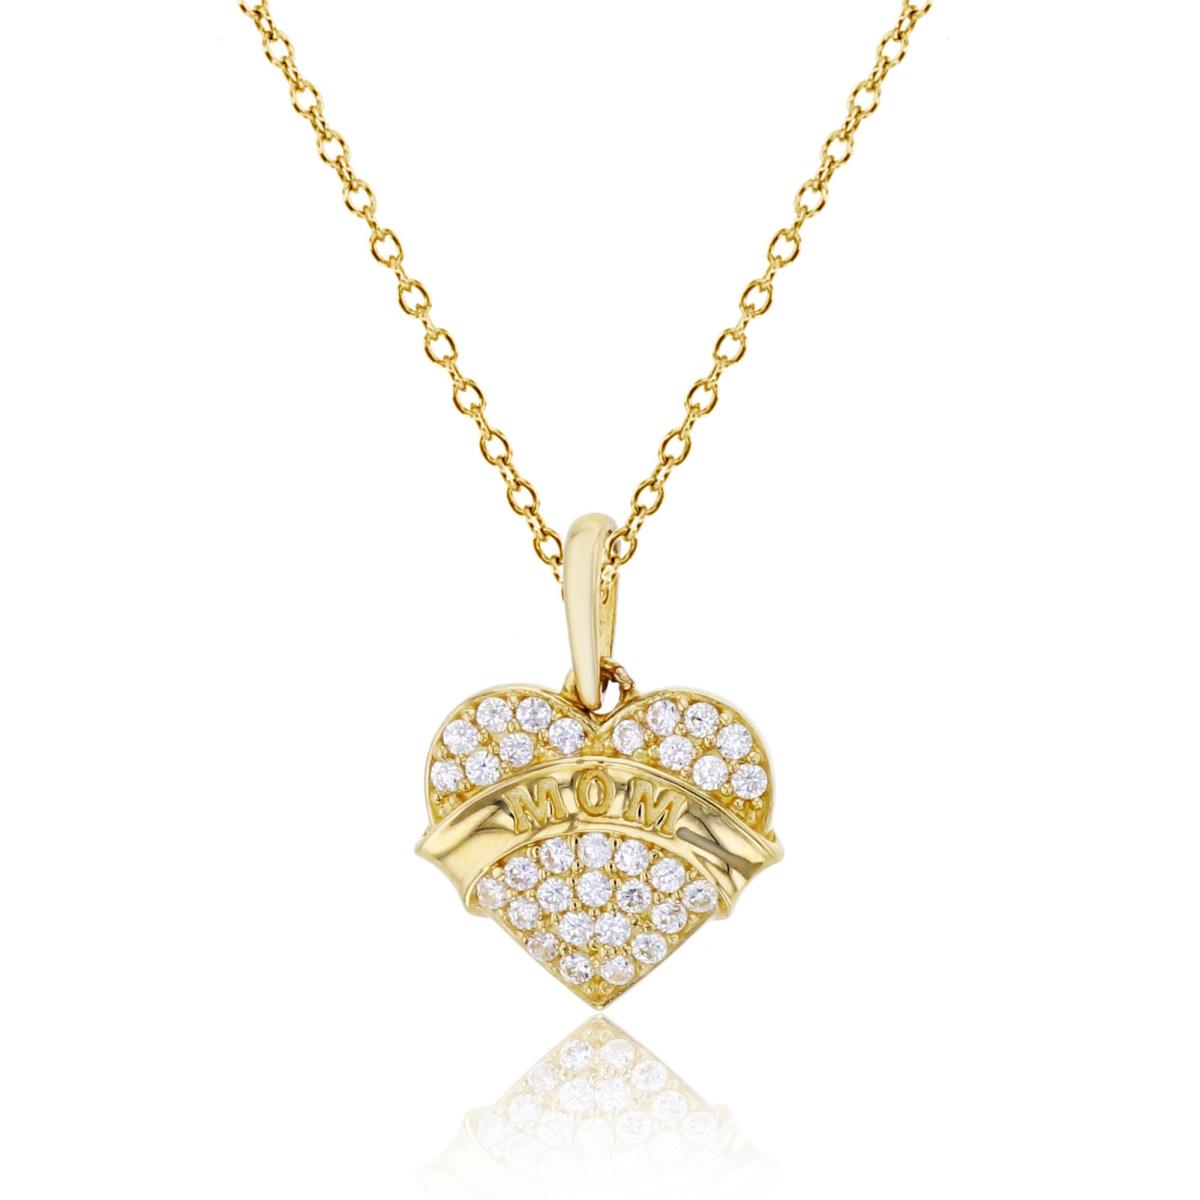 14K Yellow Gold Micropave CZ Heart with Engraved "MOM" 18" Necklace